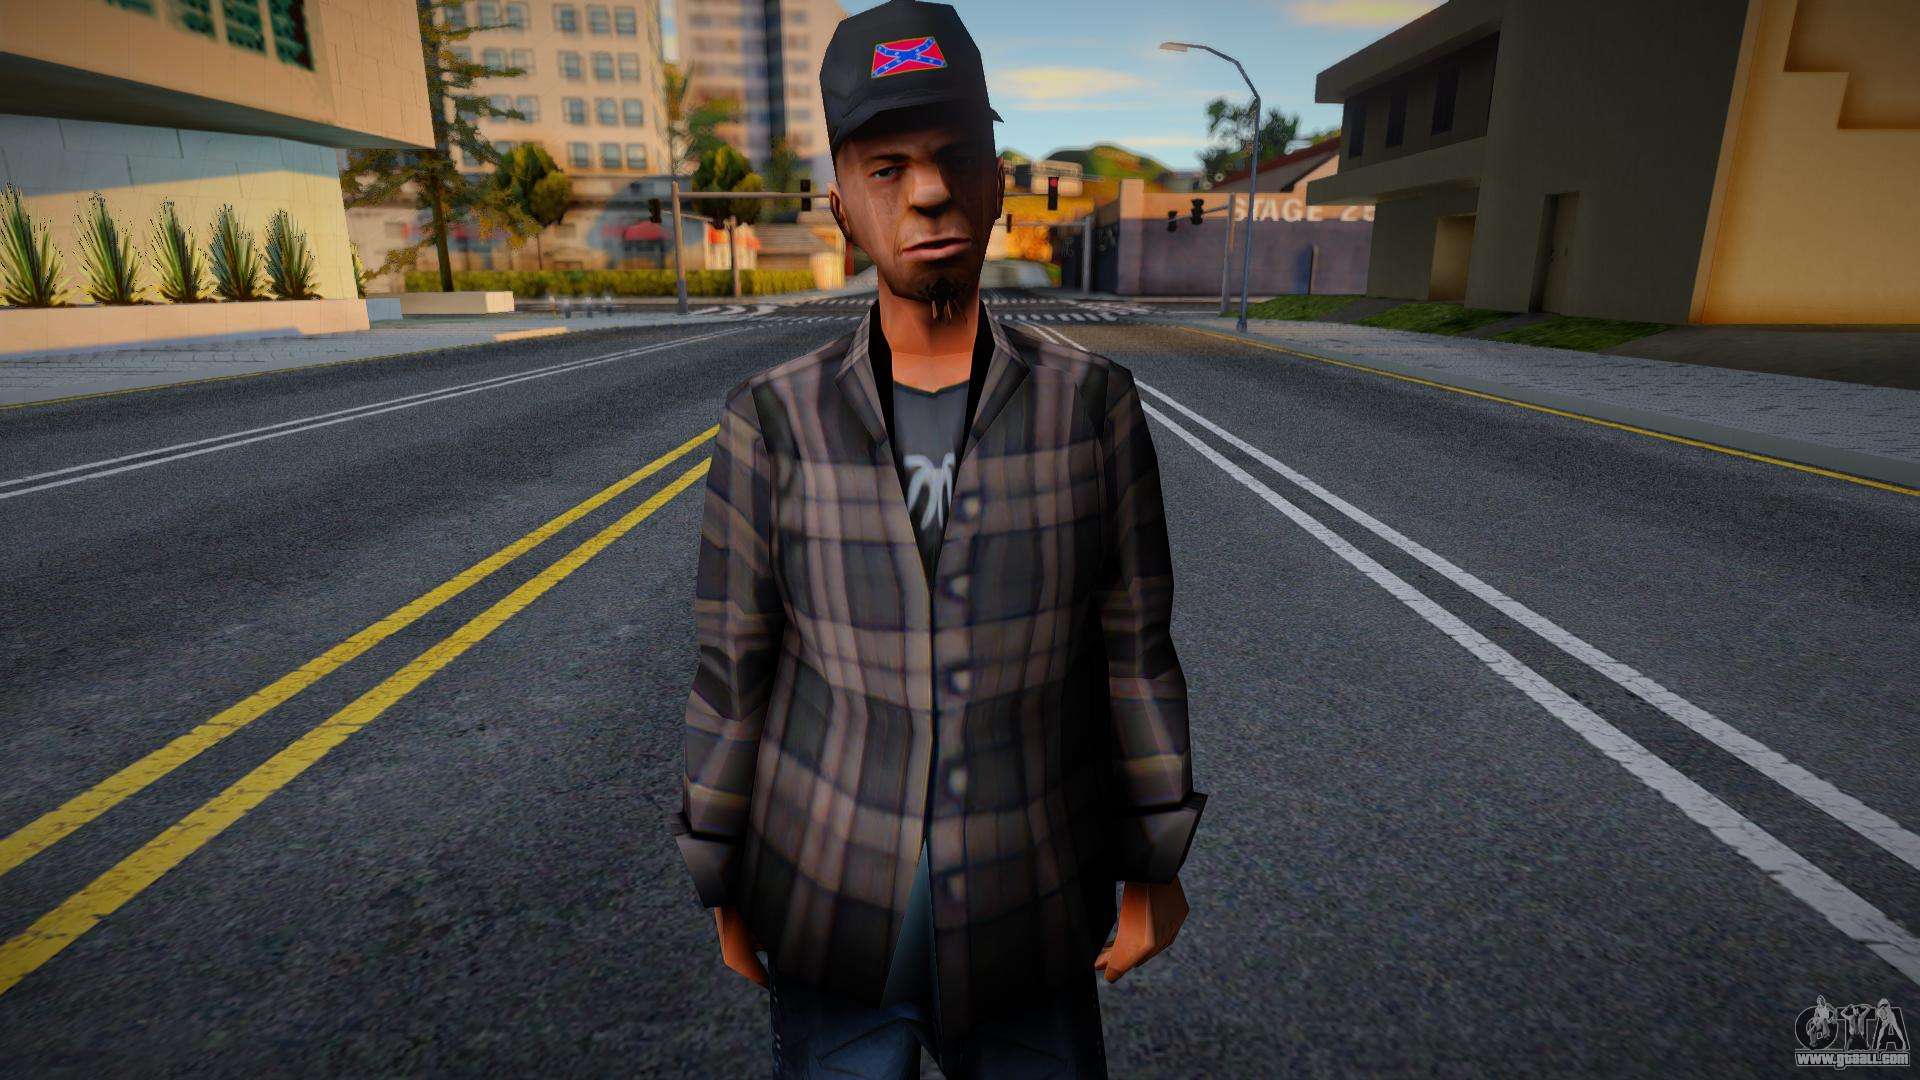 Wmycd1 Retexture for GTA San Andreas